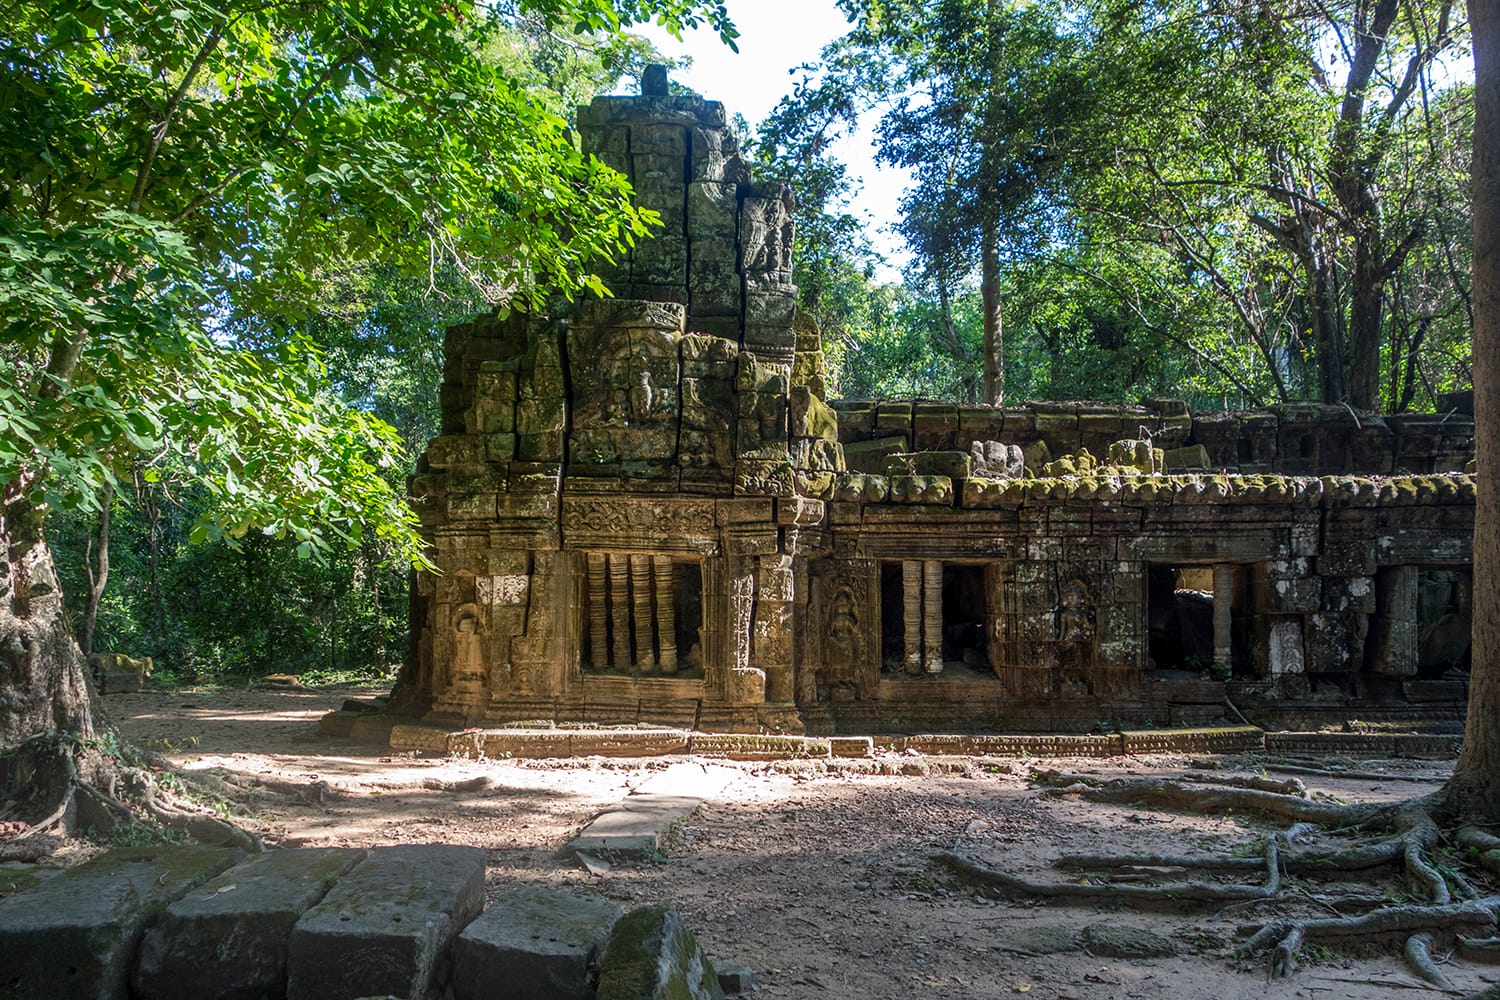 Temple at Angkor Wat hidden in the jungle. Cambodia